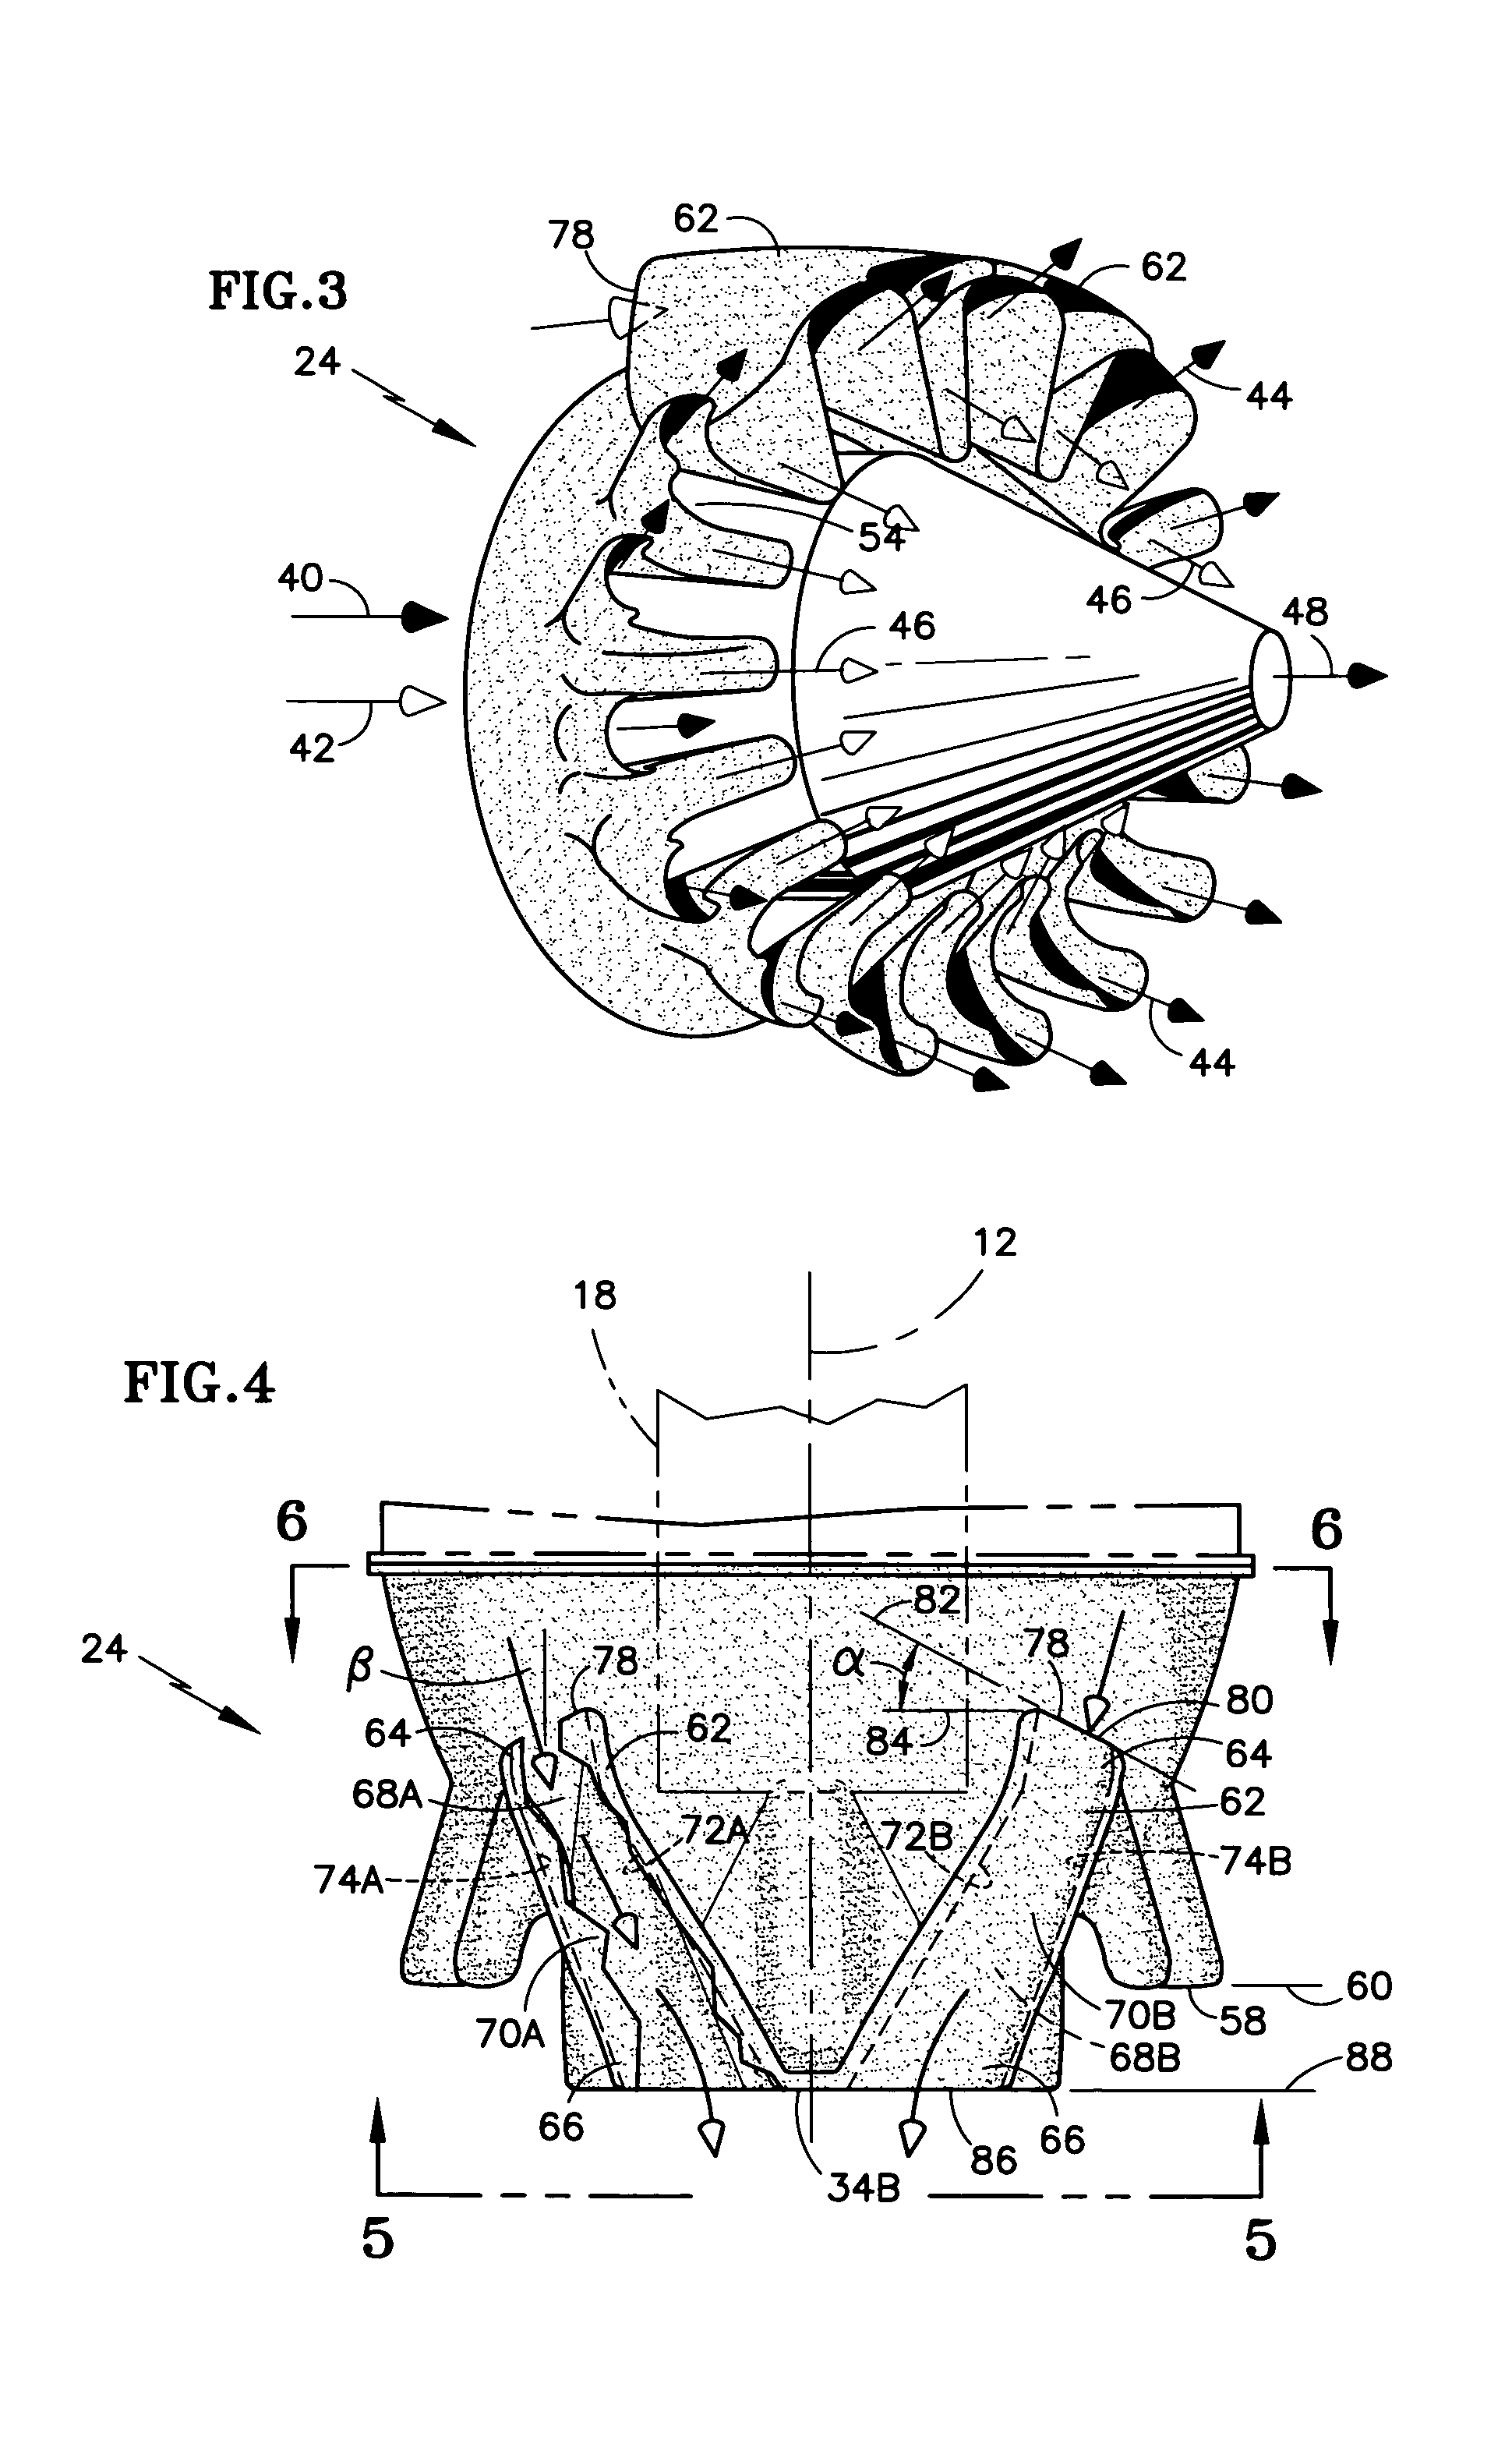 Fluid mixer with an integral fluid capture ducts forming auxiliary secondary chutes at the discharge end of said ducts